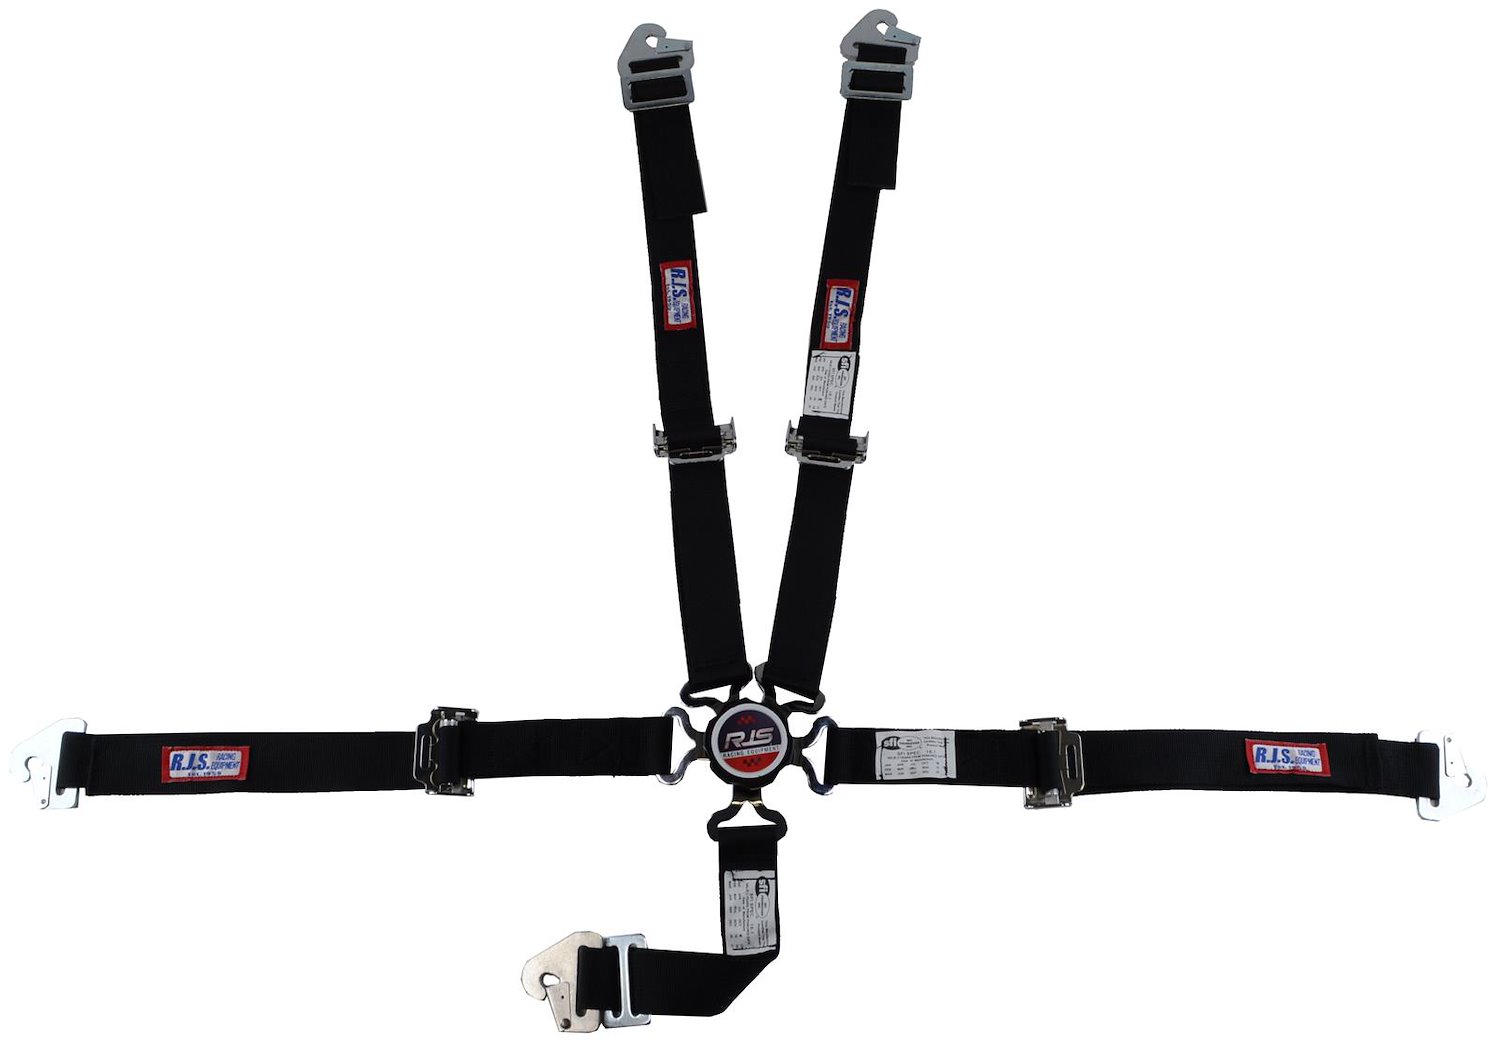 SFI 16.1 CAM-LOCK HARNESS 2 PULL UP Lap Belt 2 Shoulder Harness Individual FLOOR Mount 2 SINGLE Sub ALL WRAP ENDS YELLOW